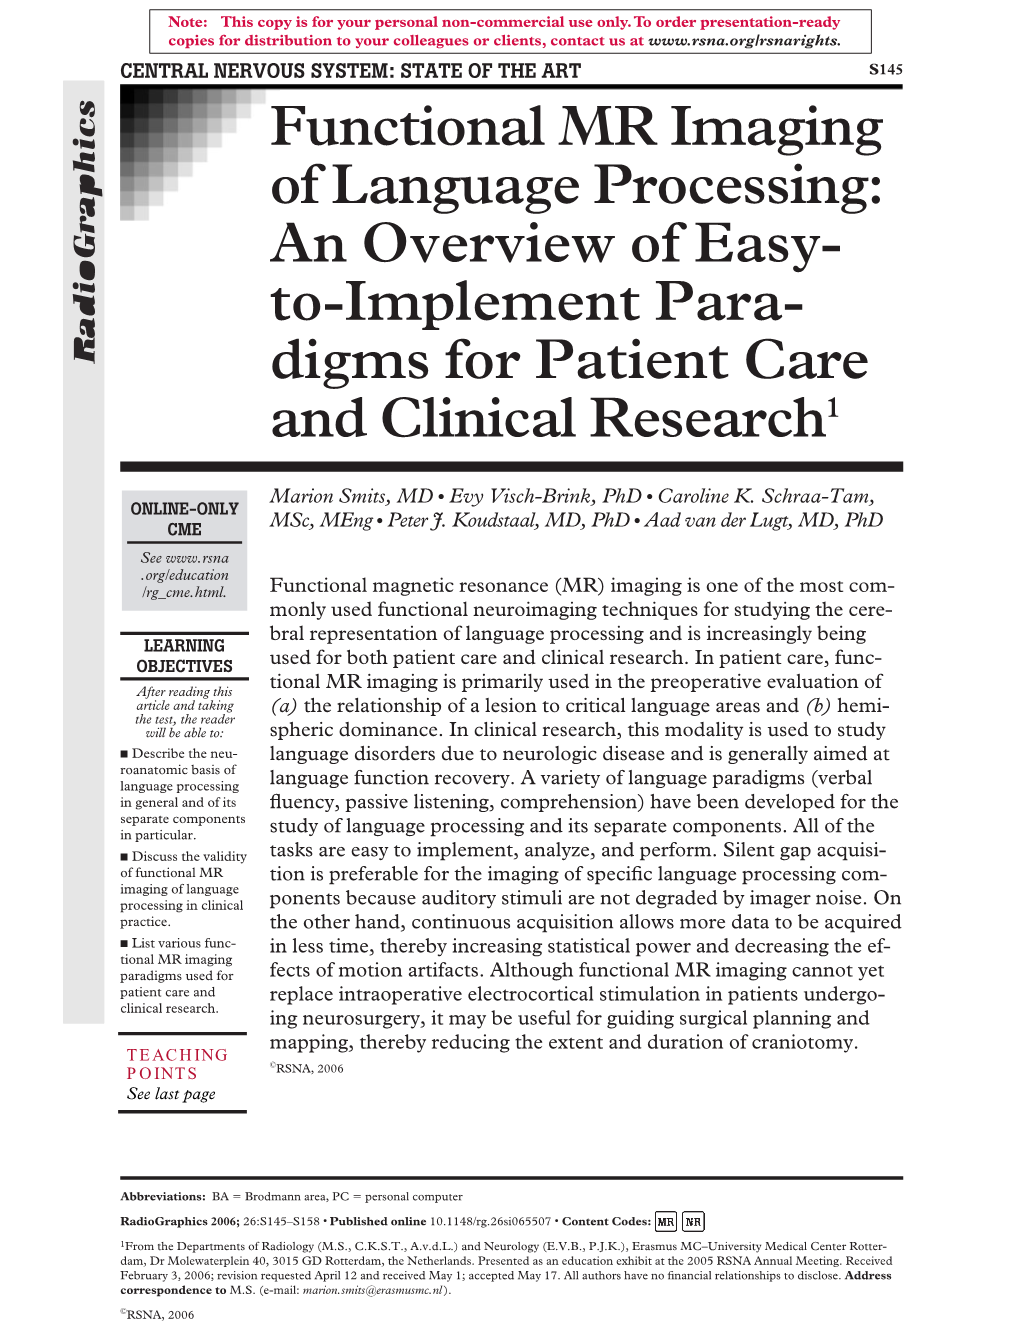 Functional MR Imaging of Language Processing: an Overview of Easy- To-Implement Para- Digms for Patient Care and Clinical Resear